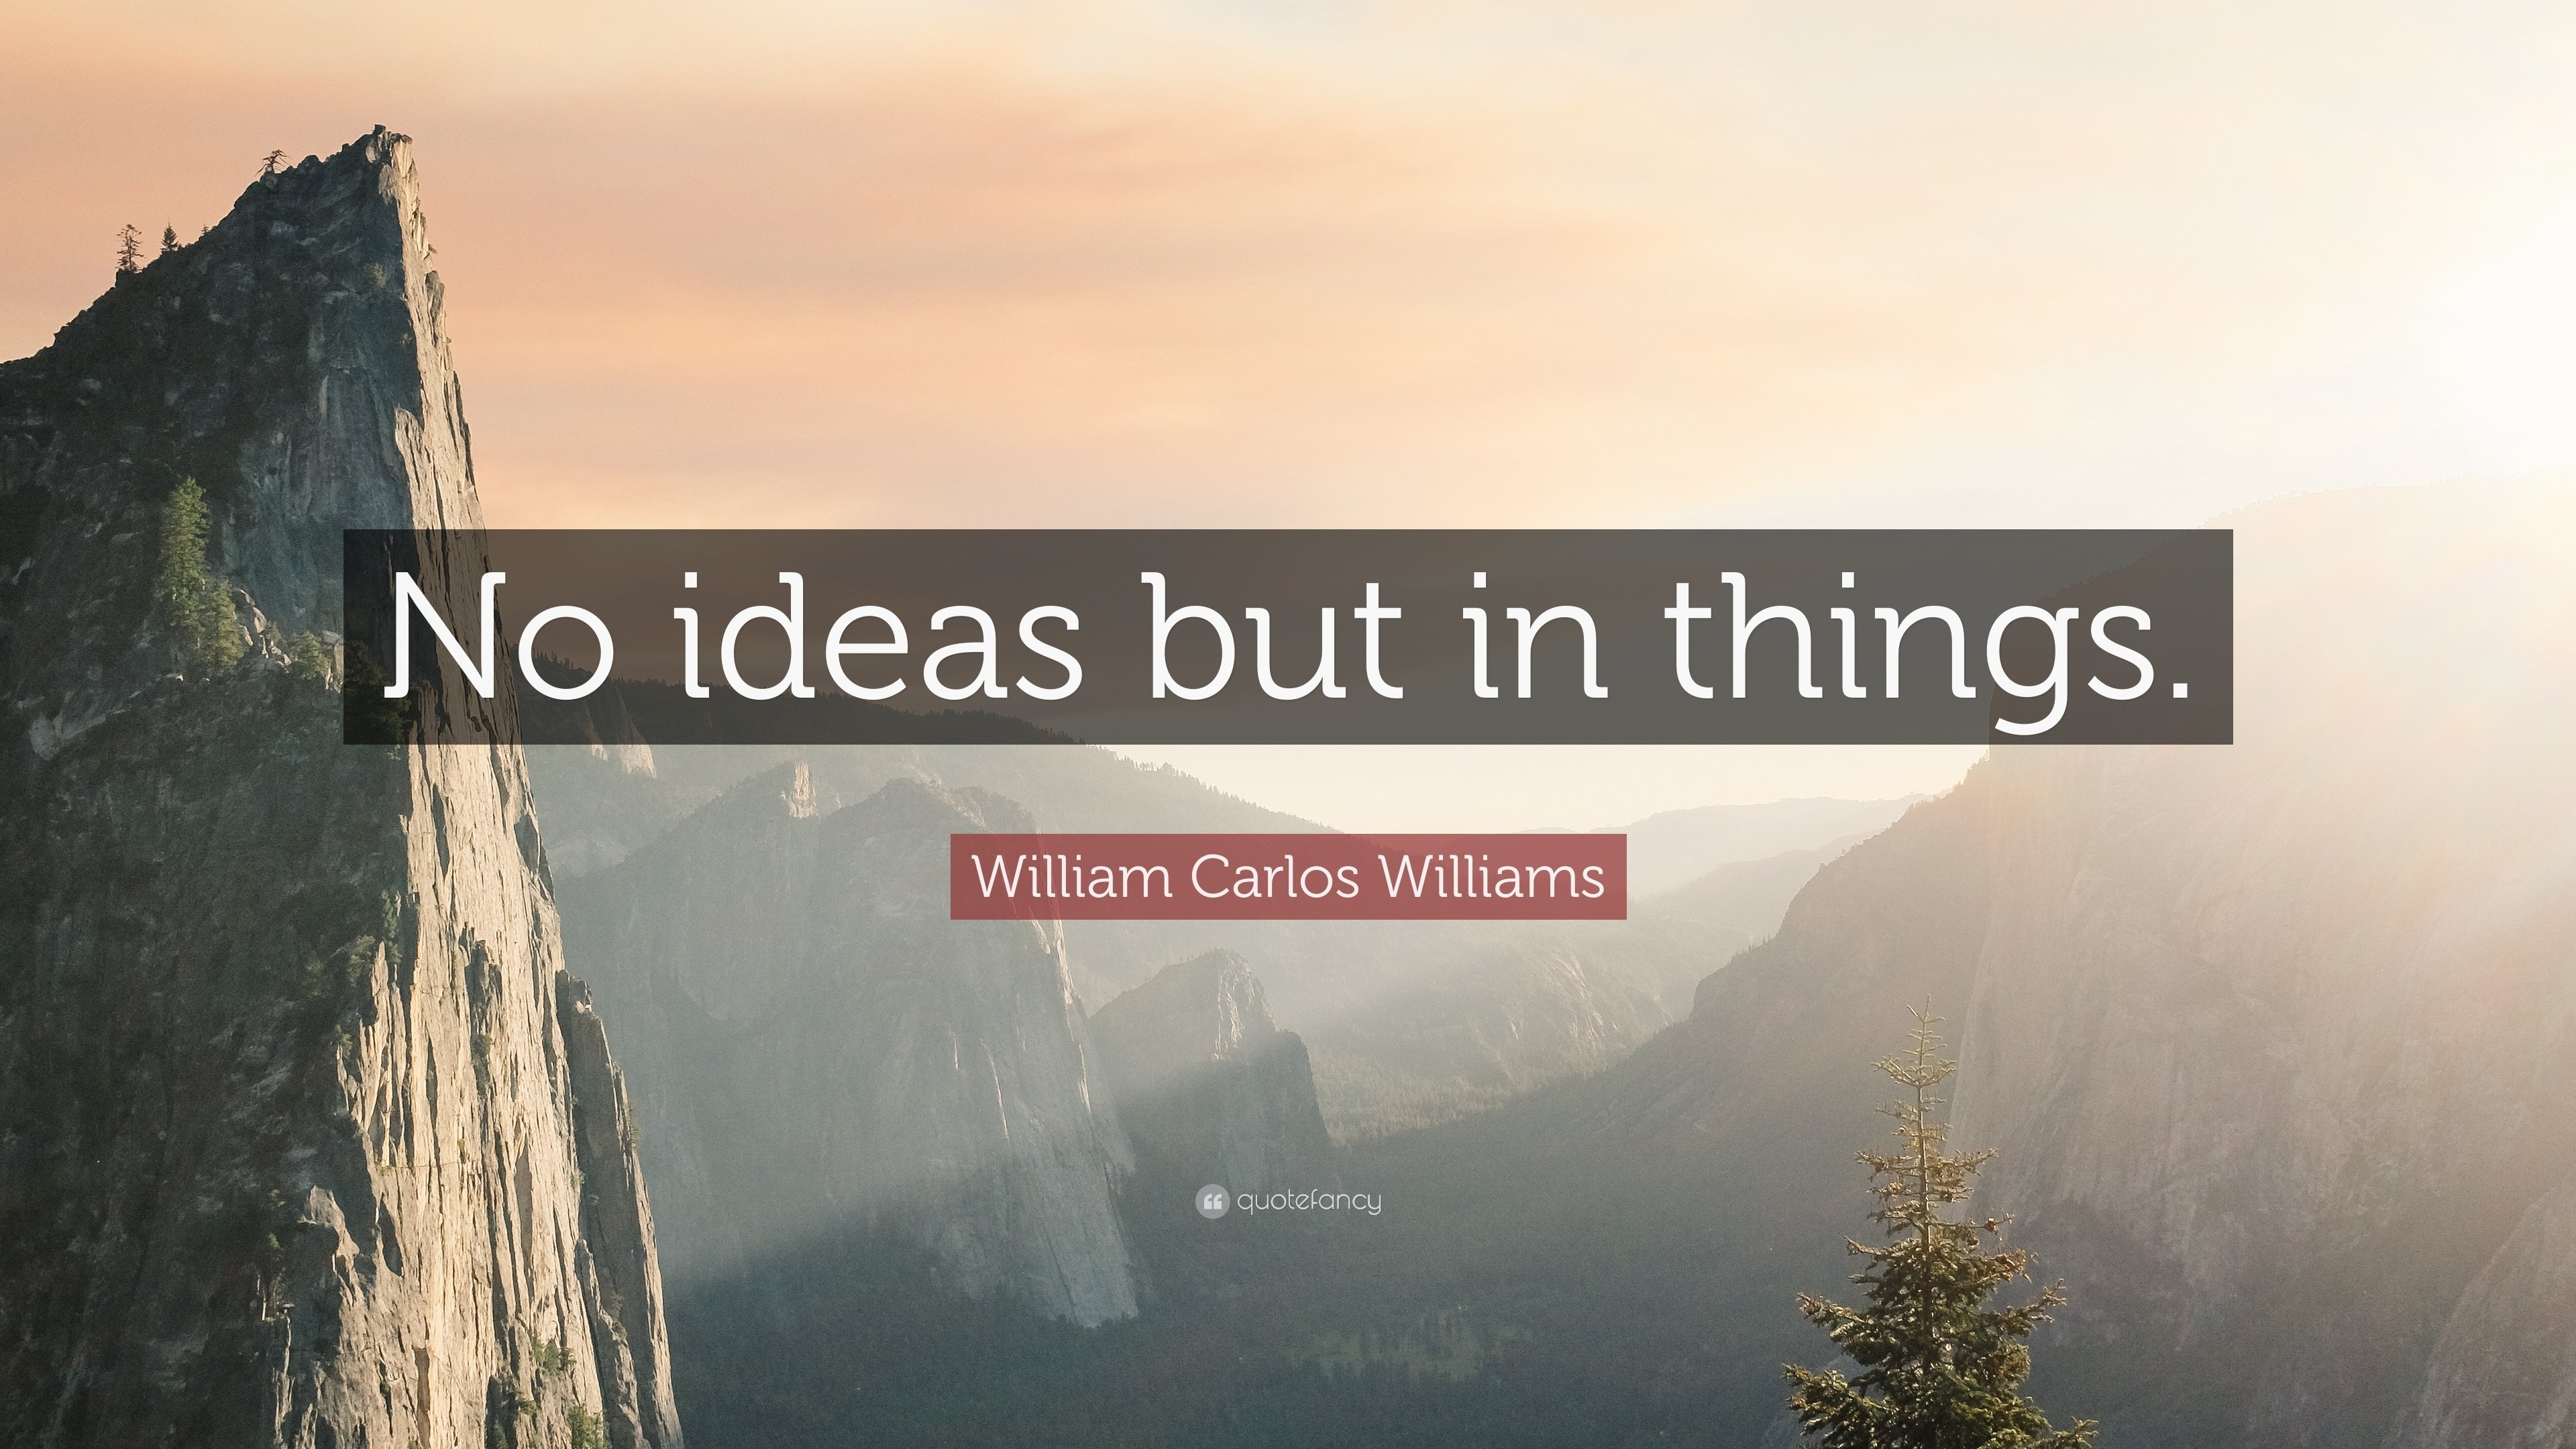 10 Fabulous No Ideas But In Things william carlos williams quote no ideas but in things 7 3 2022